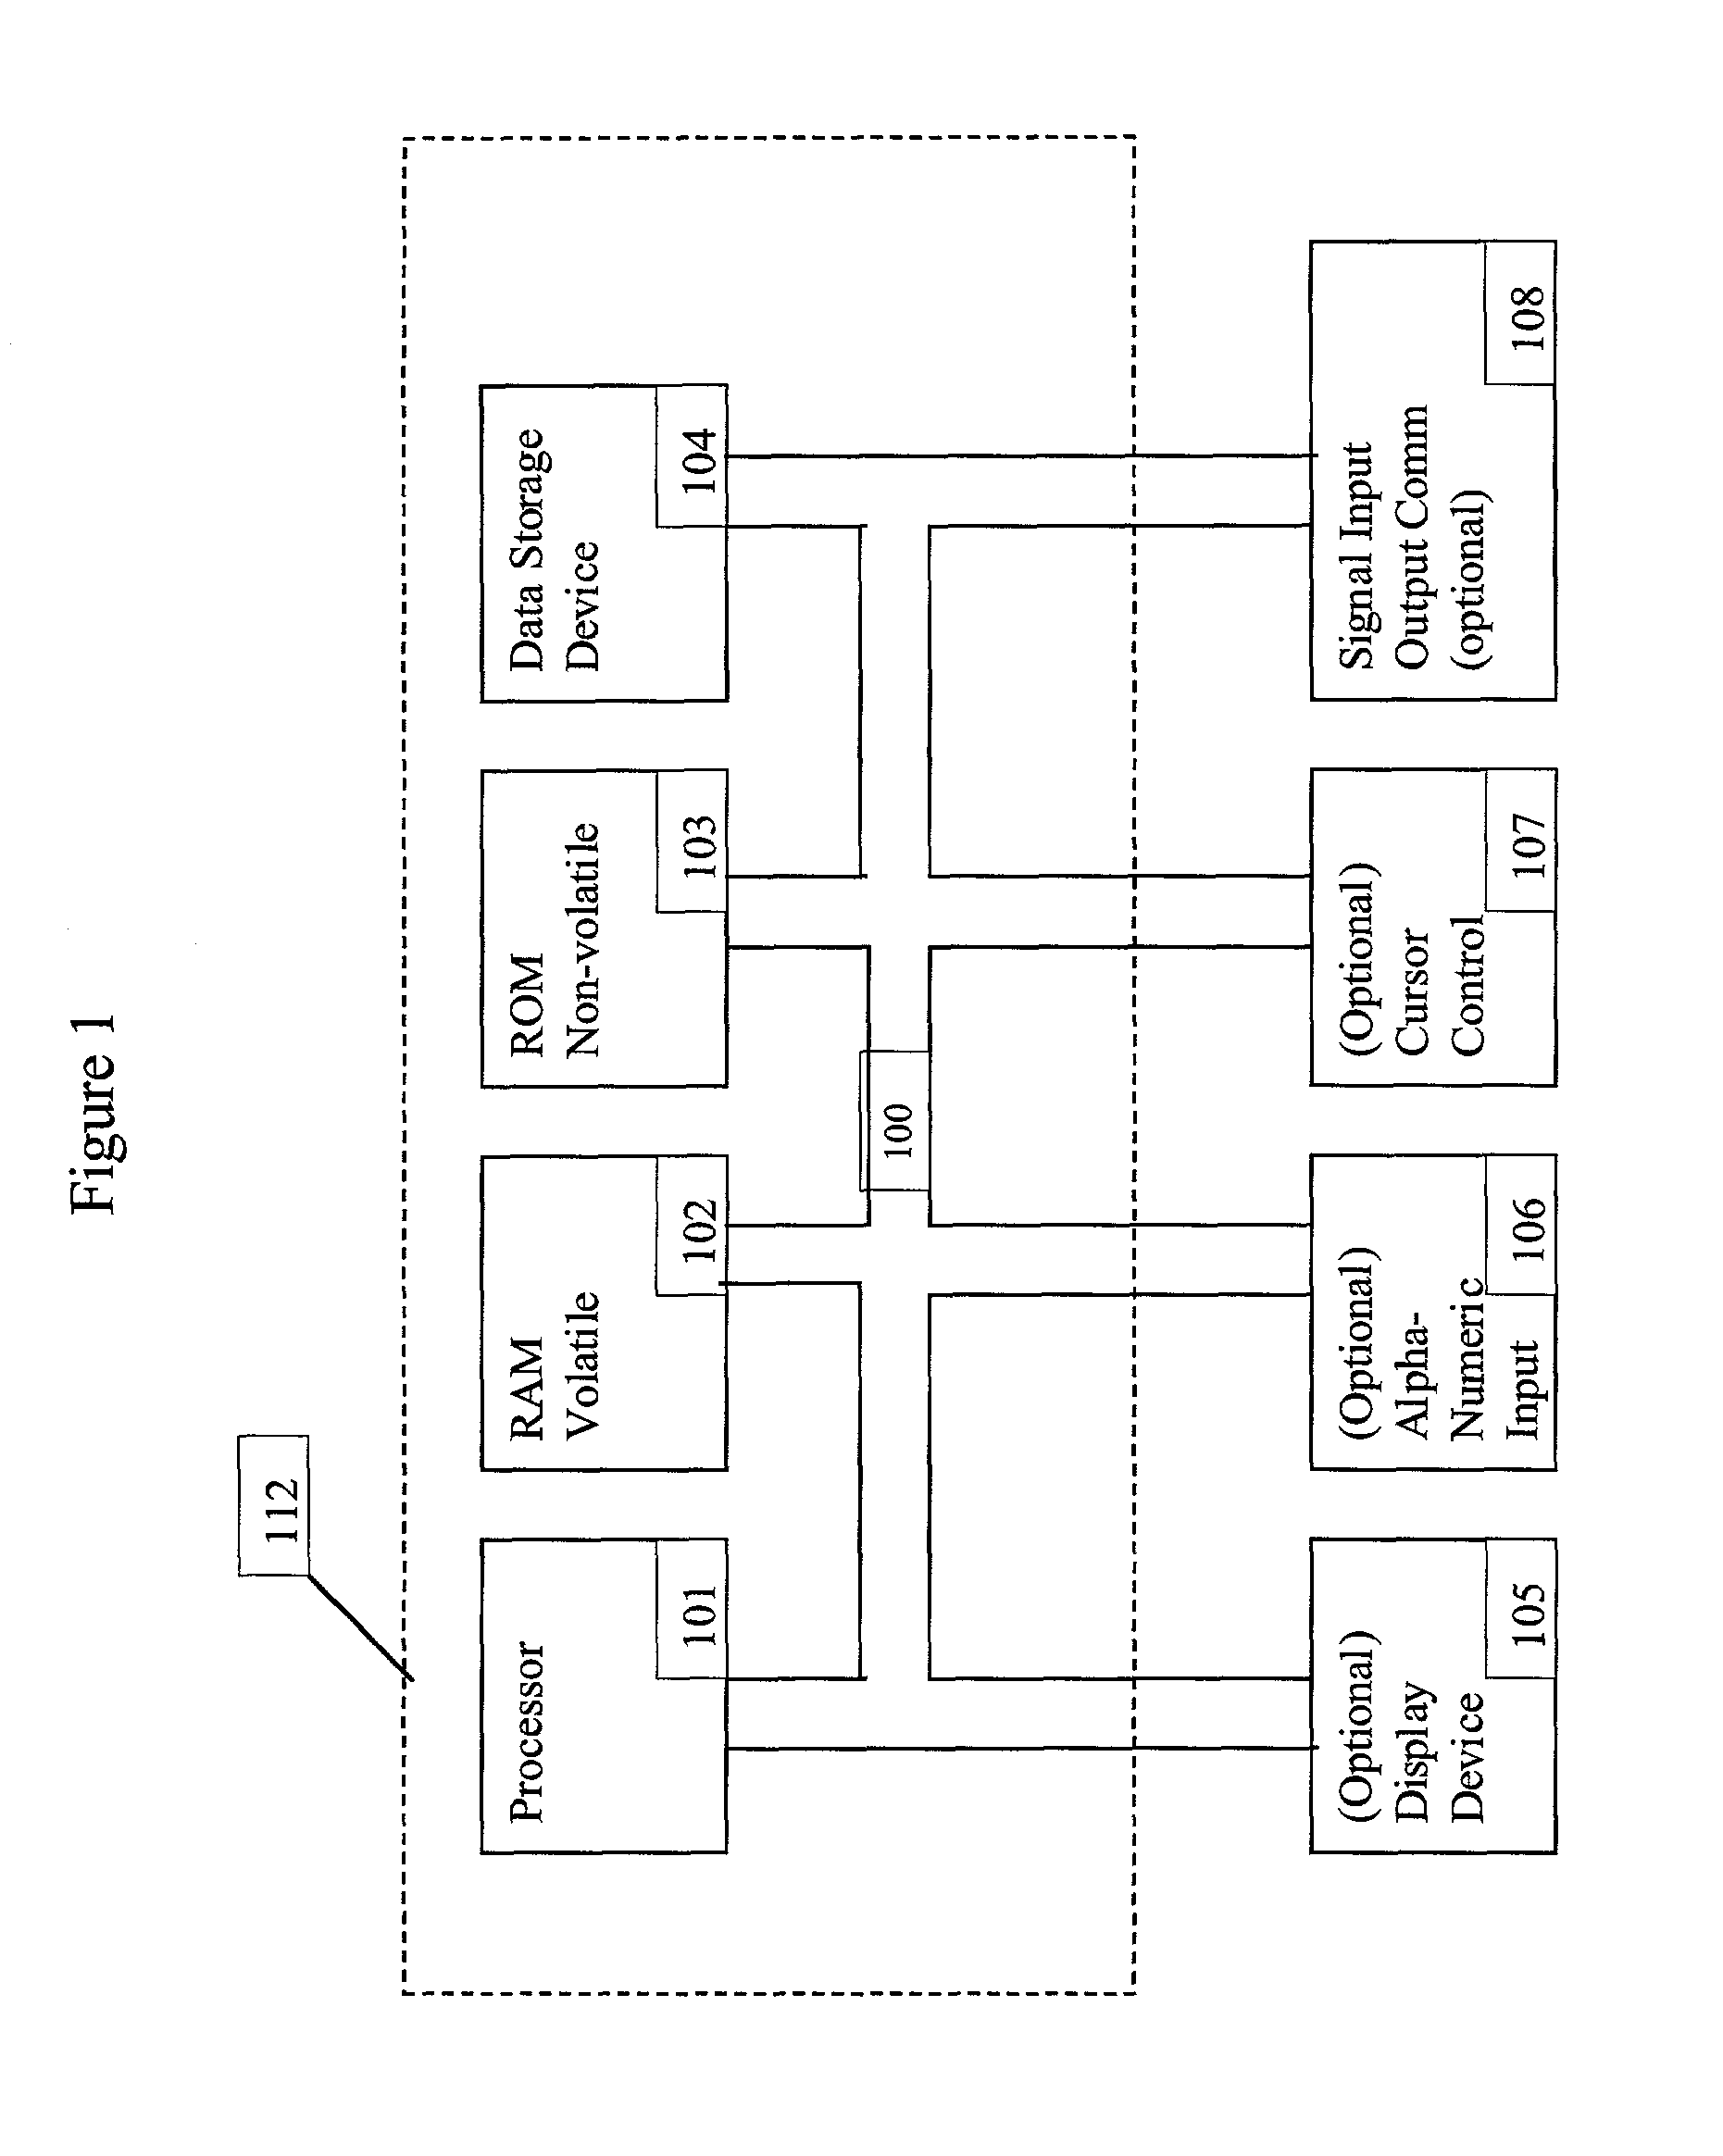 System providing automatic source code generation for personalization and parameterization of user modules